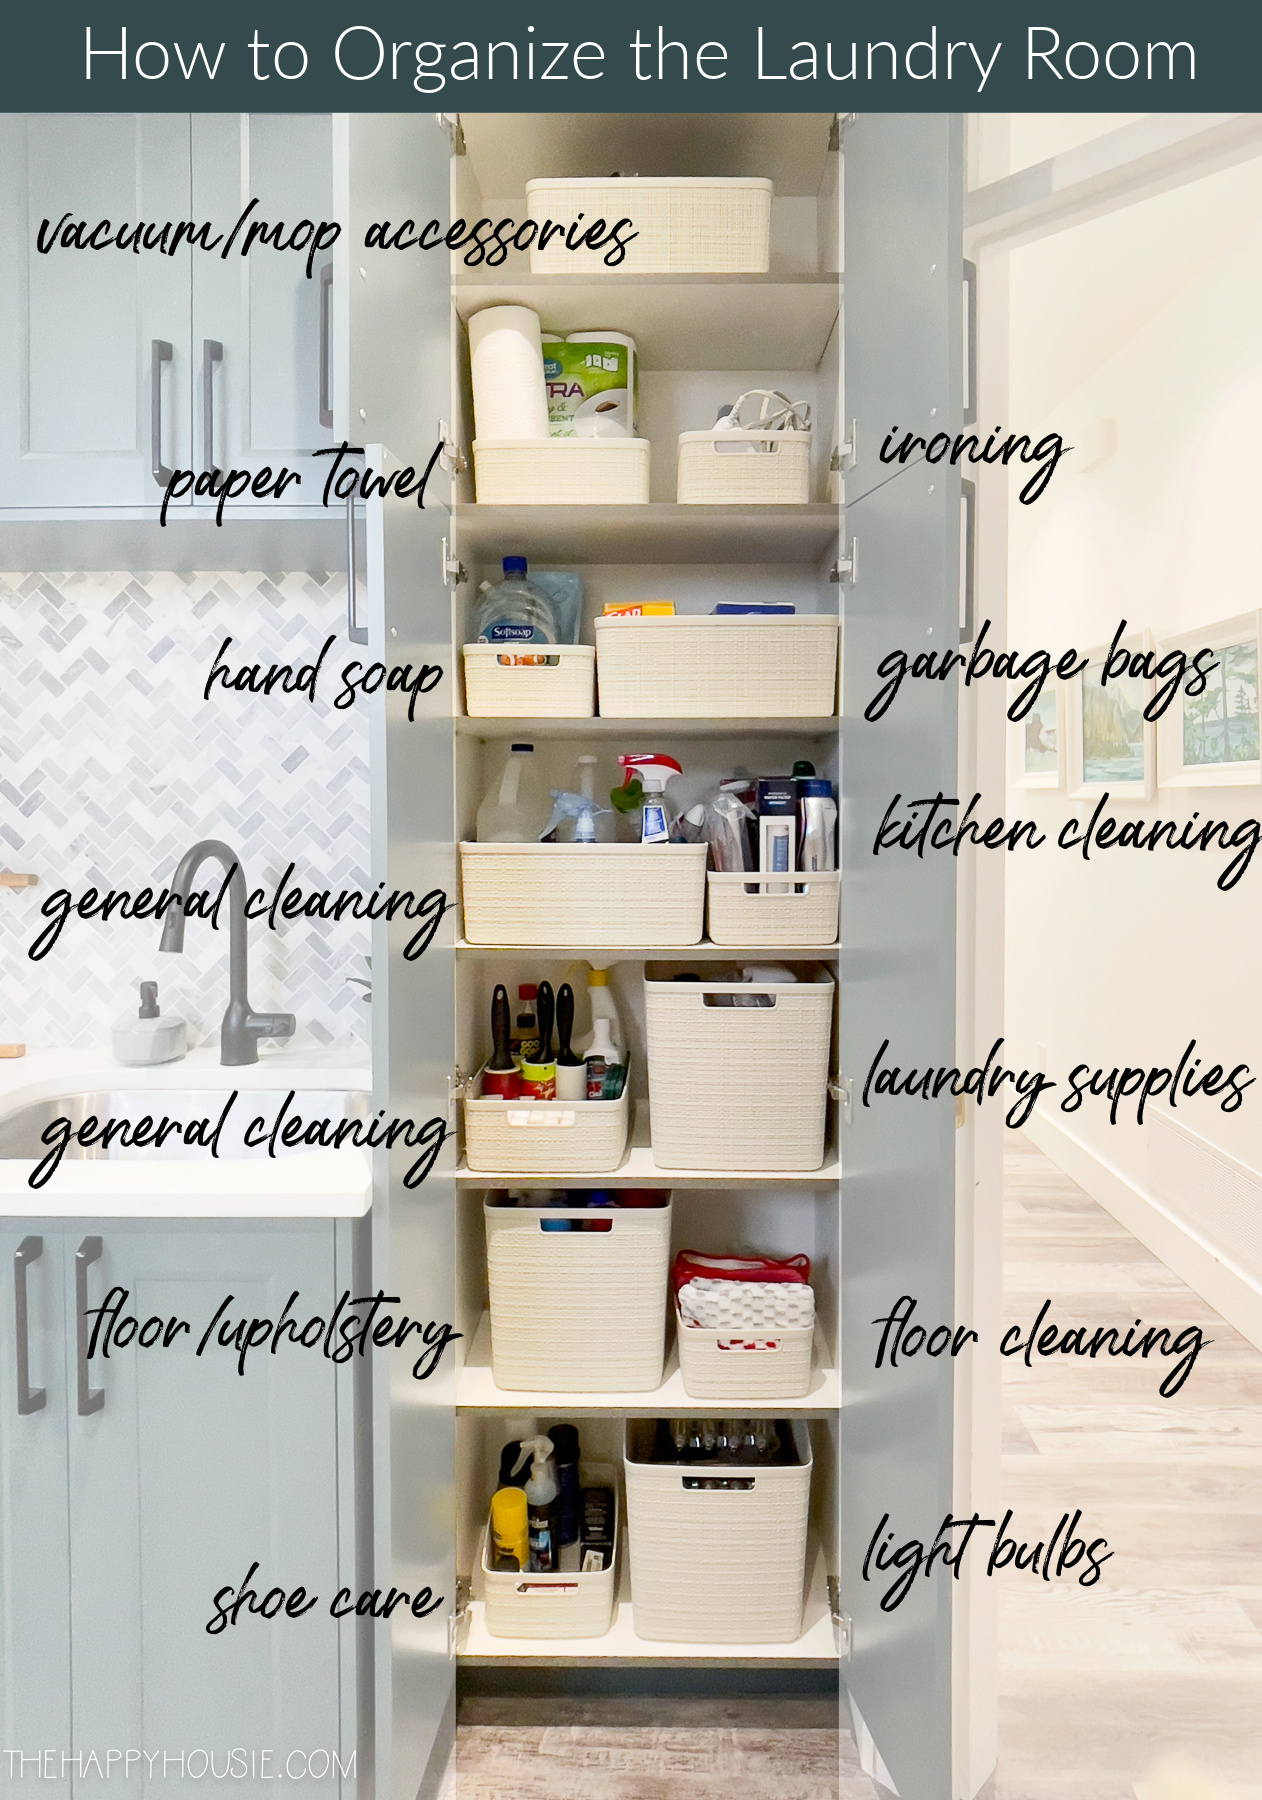 Everything You Need to Organize Your Home (Room by Room) - A